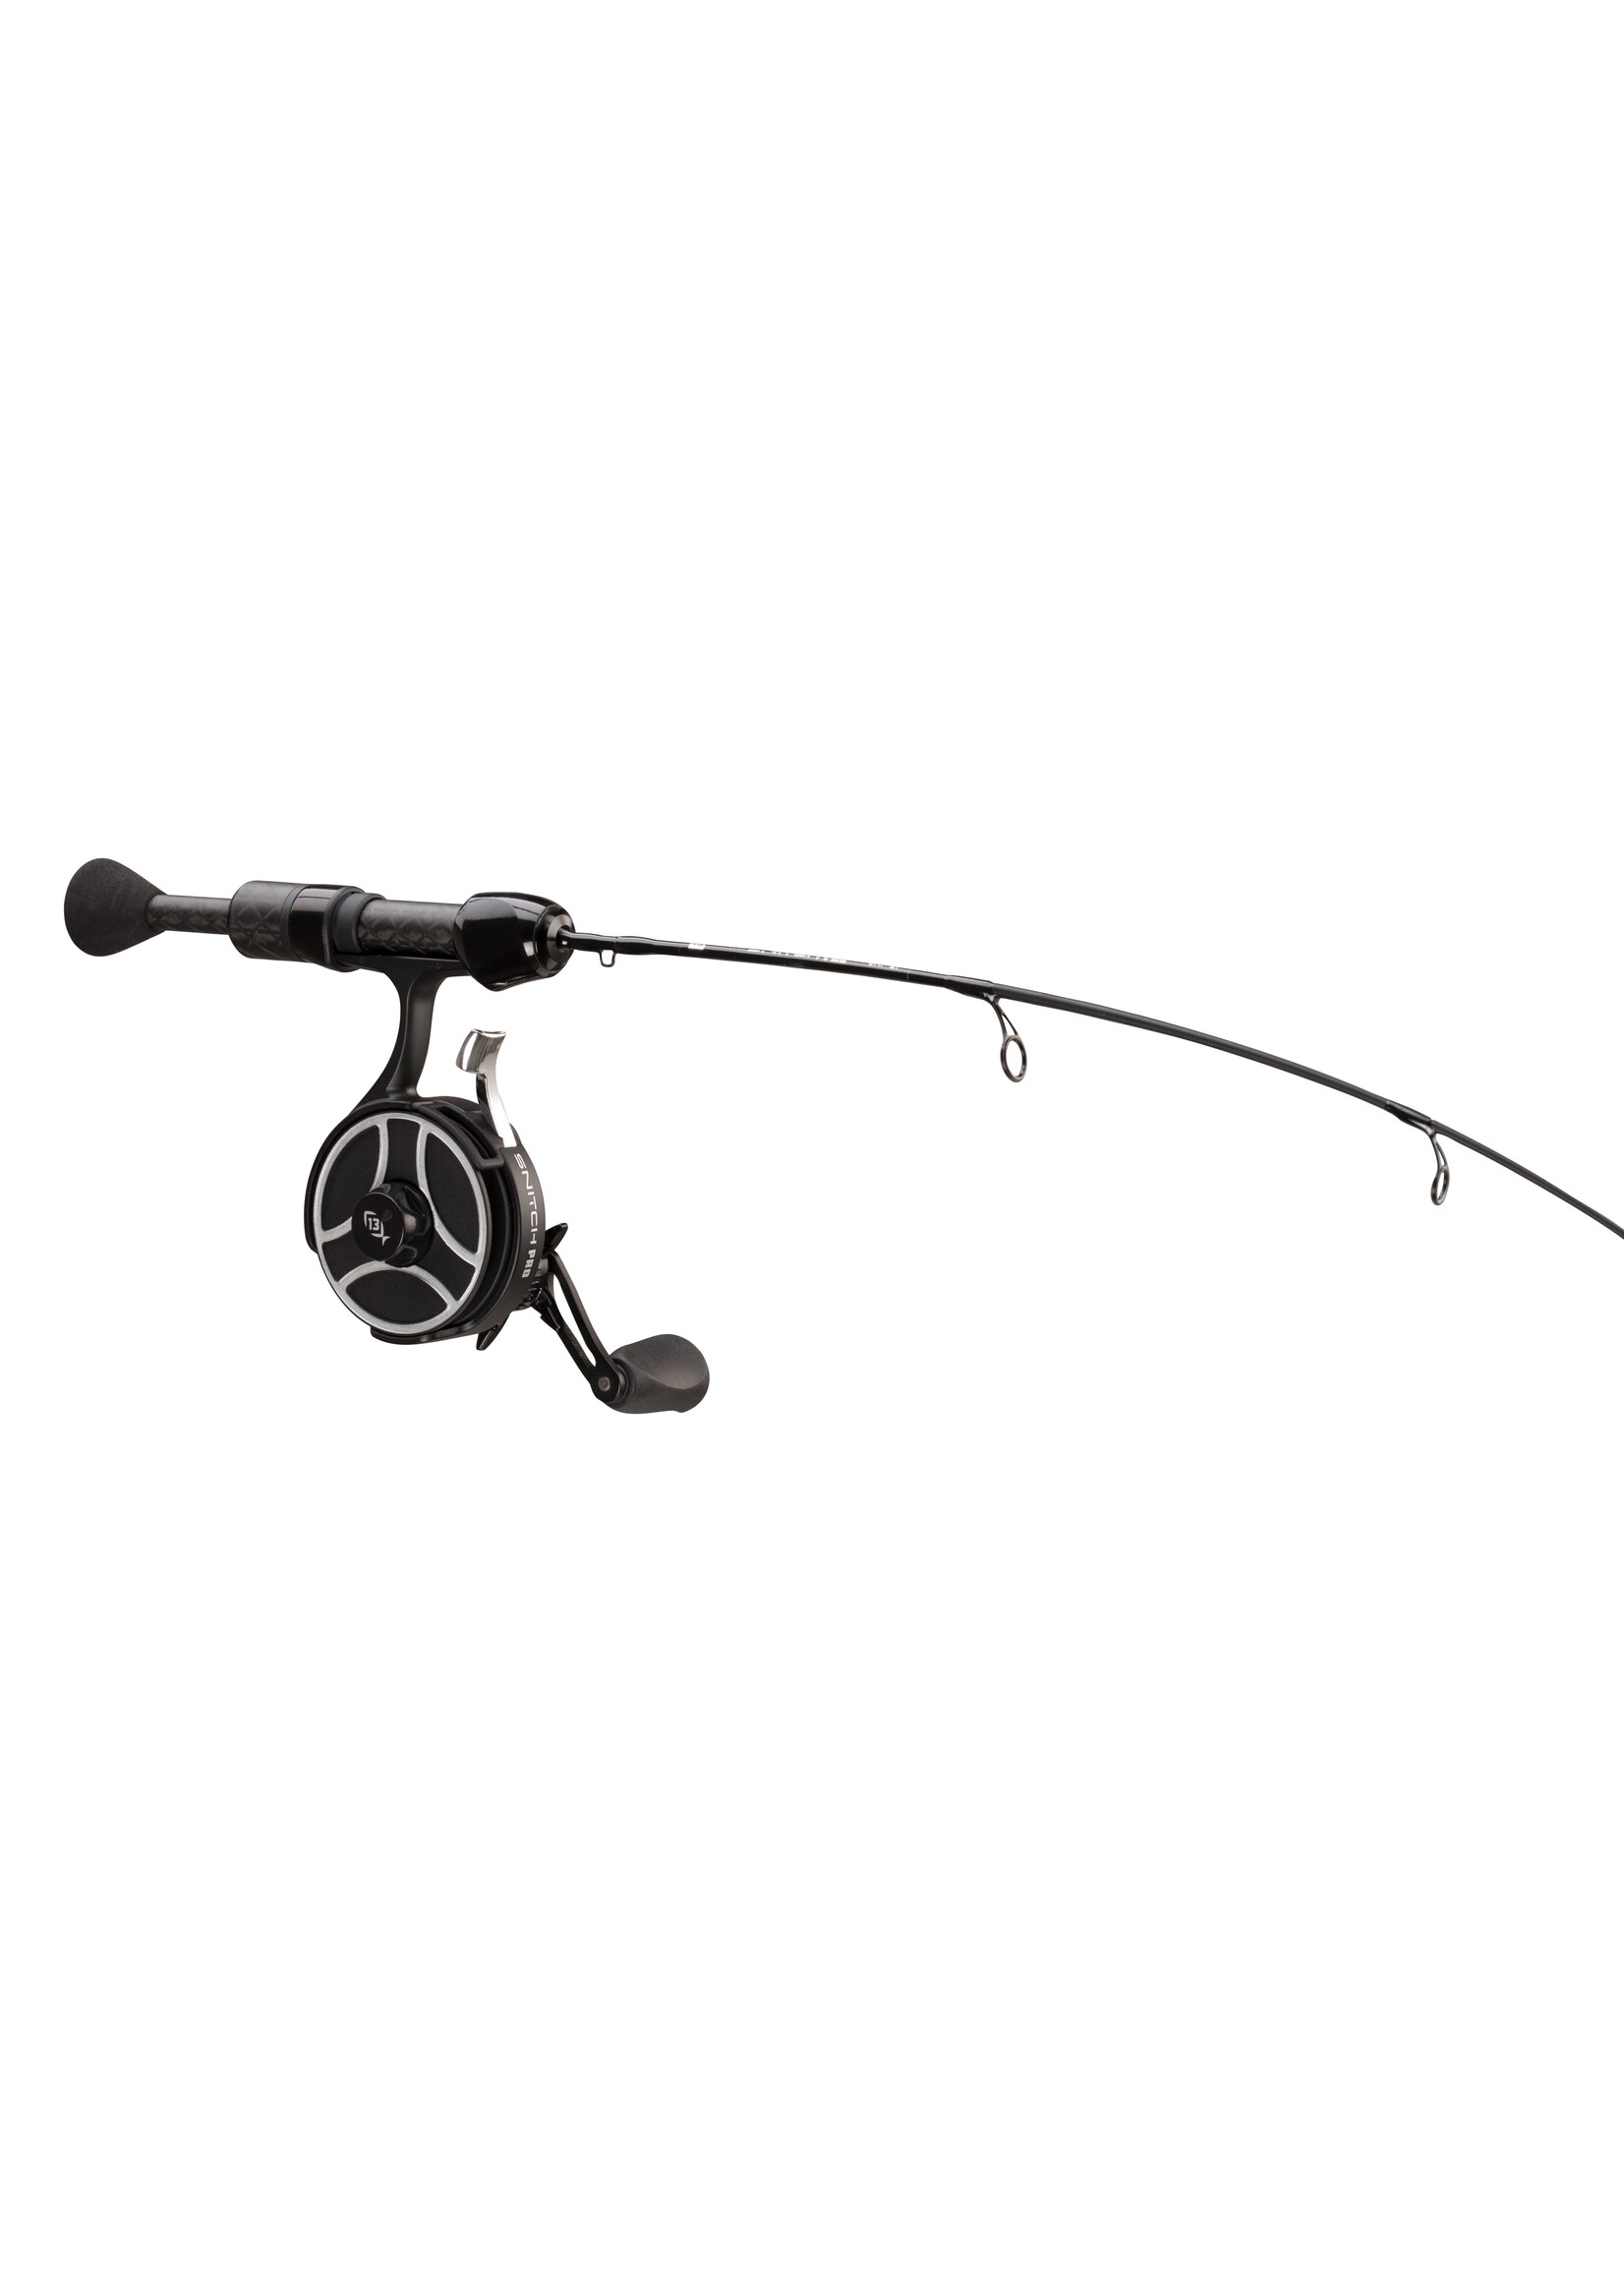 Ghost Series Spin Rod